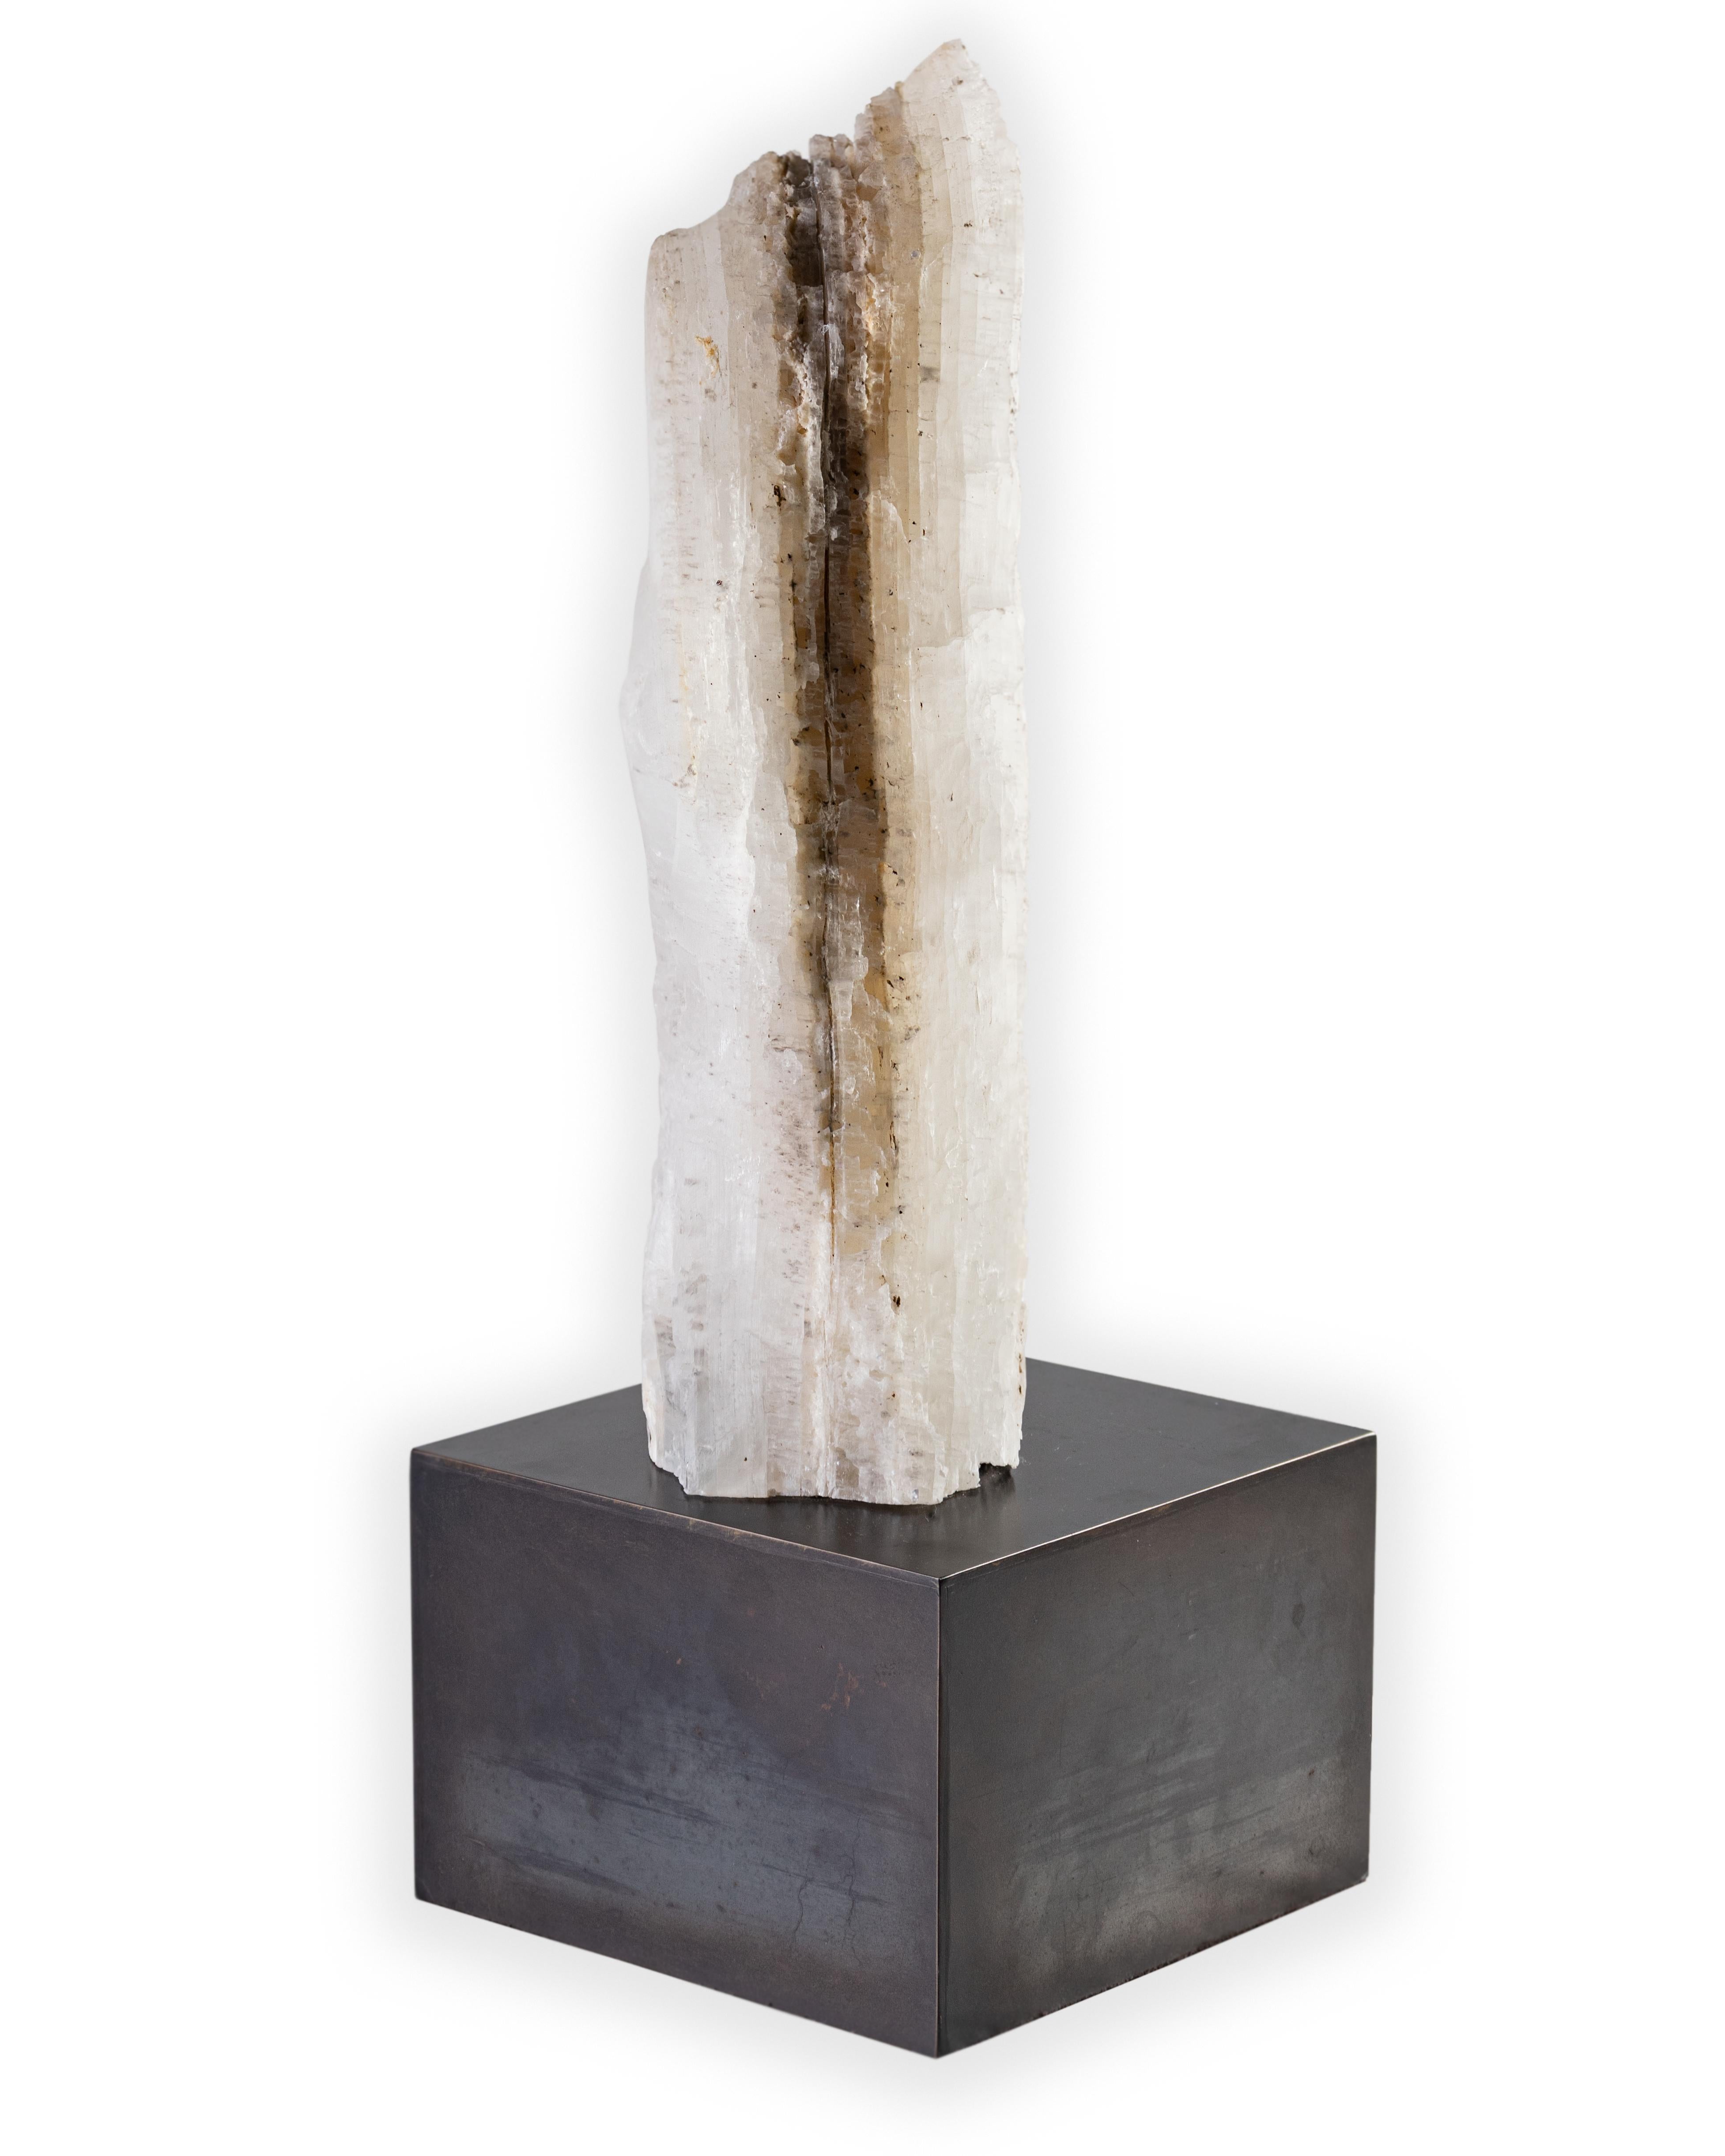 Selenite tower on museum mount

Selenite crystal from New Mexico then crafted in to a museum style tower sculpture piece.





 